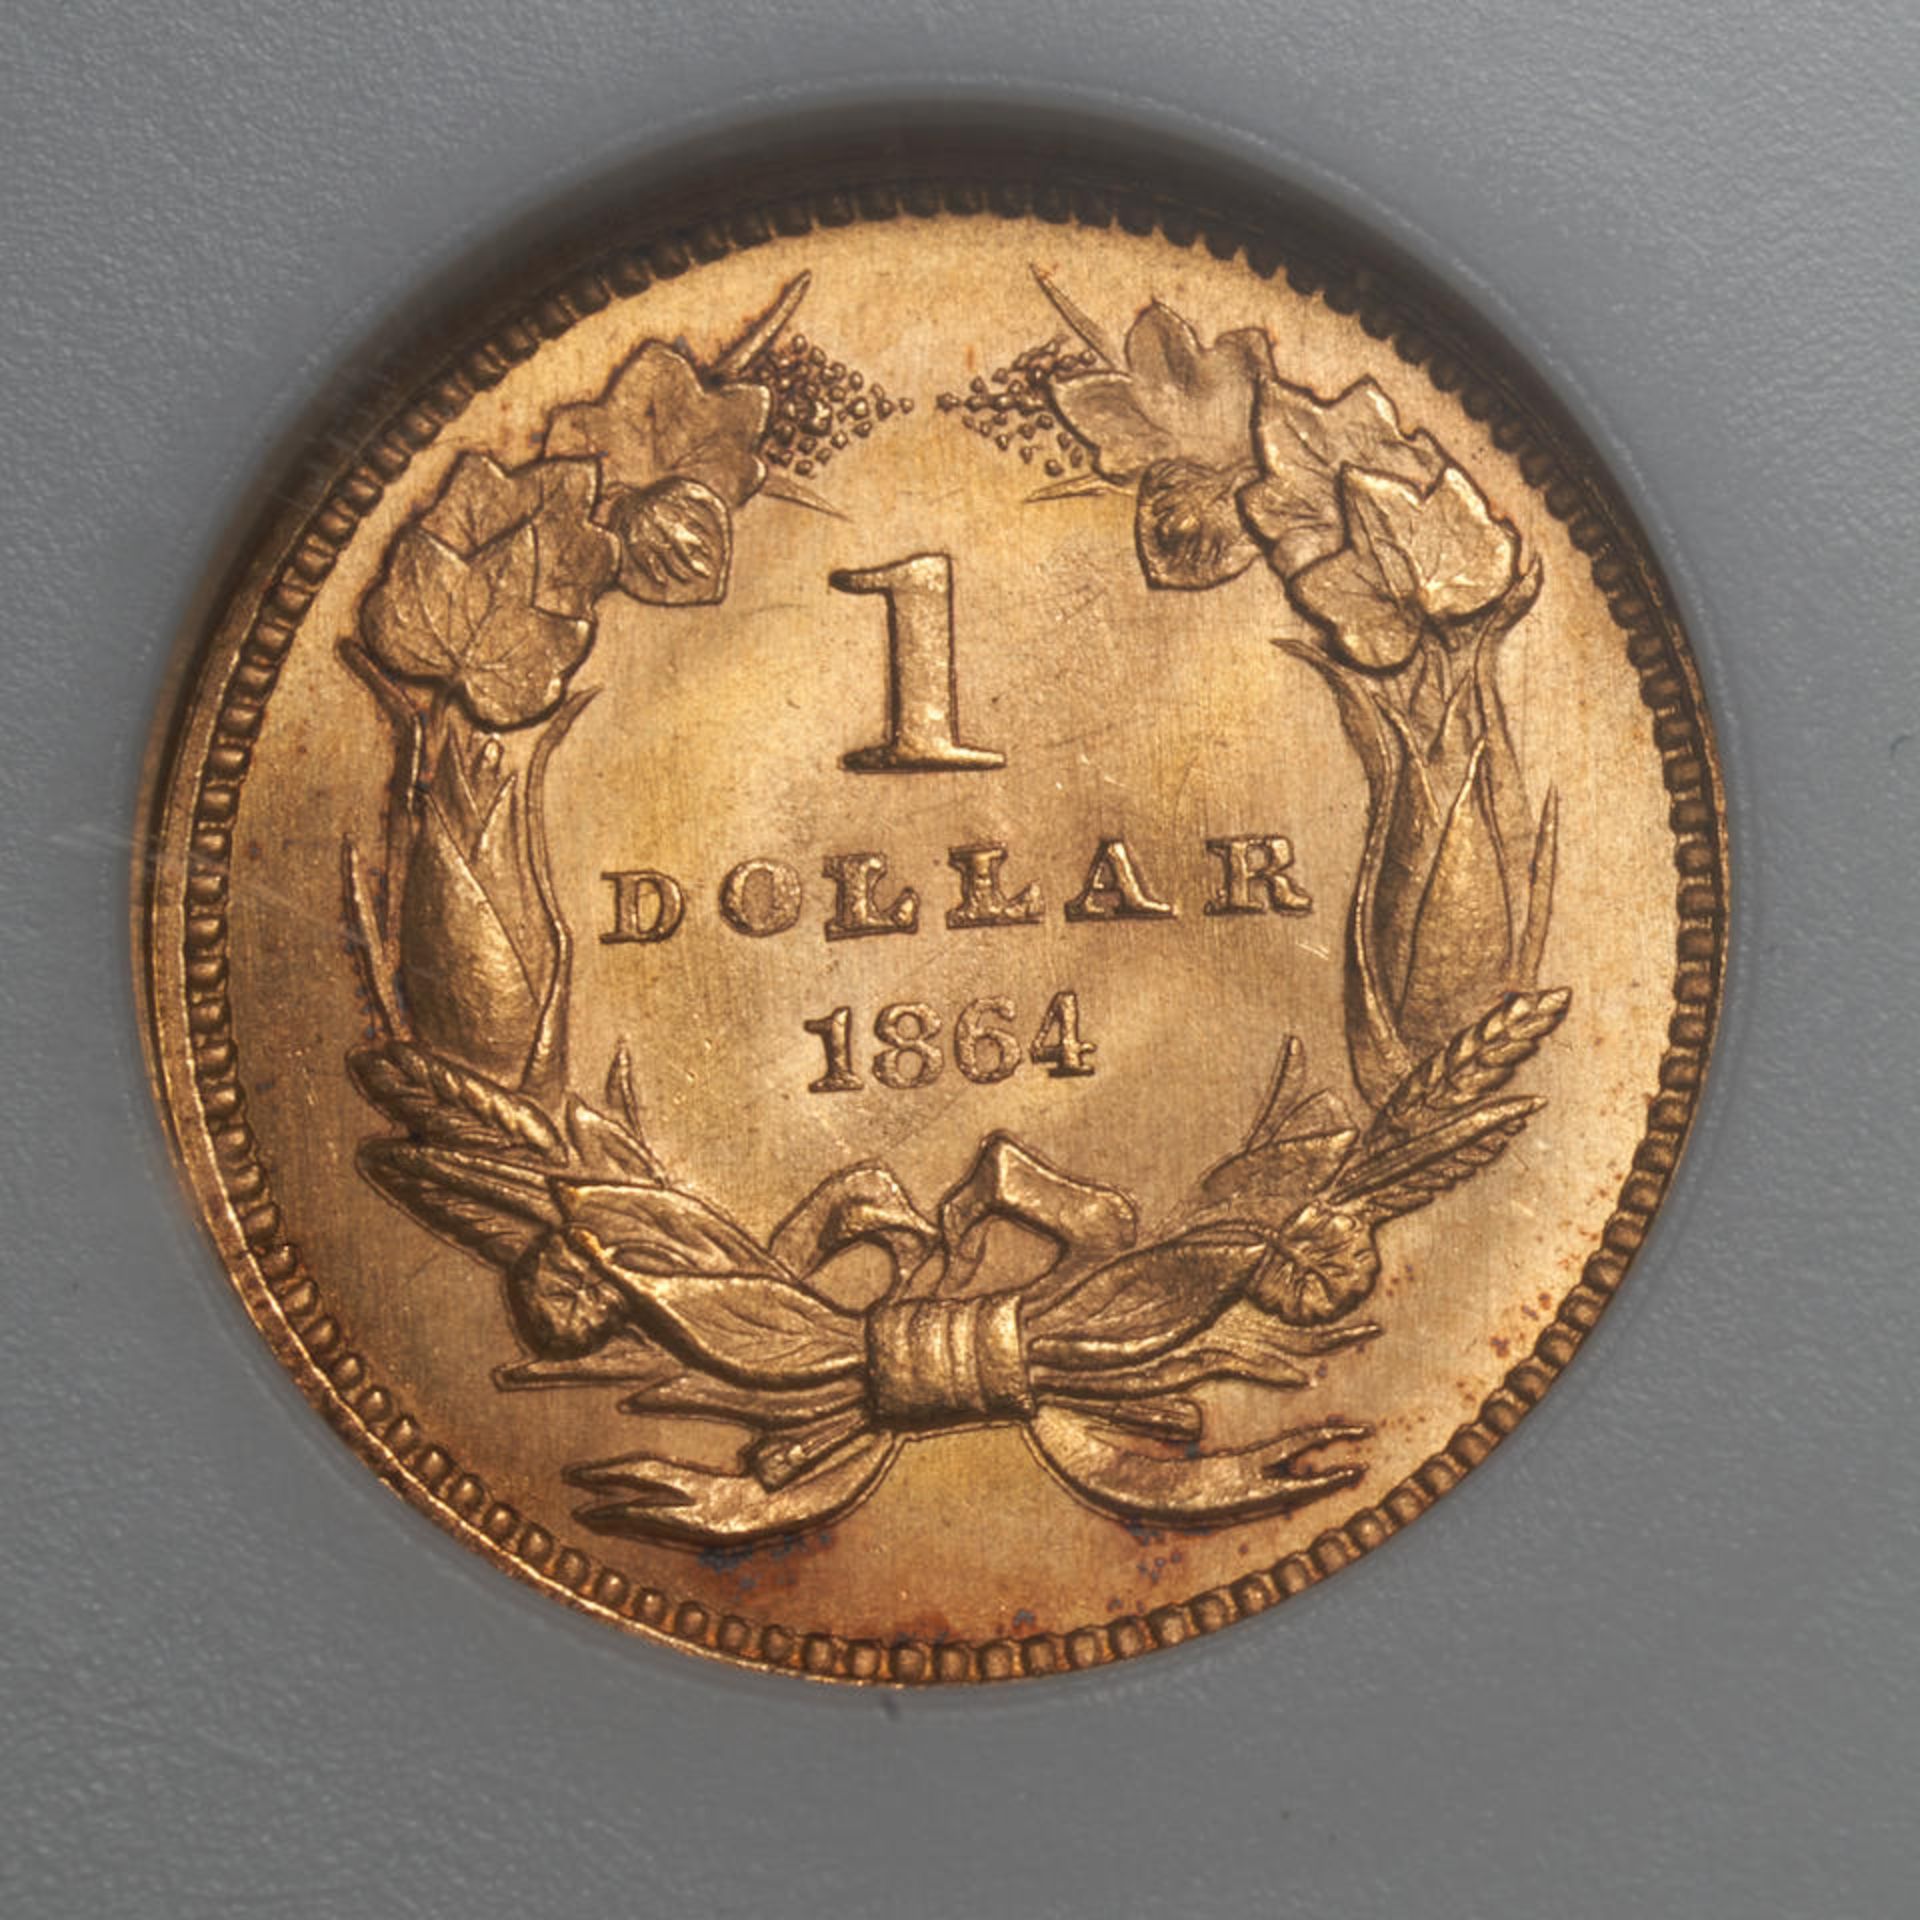 United States 1864 Indian Head $1 Gold Coin. - Image 2 of 4